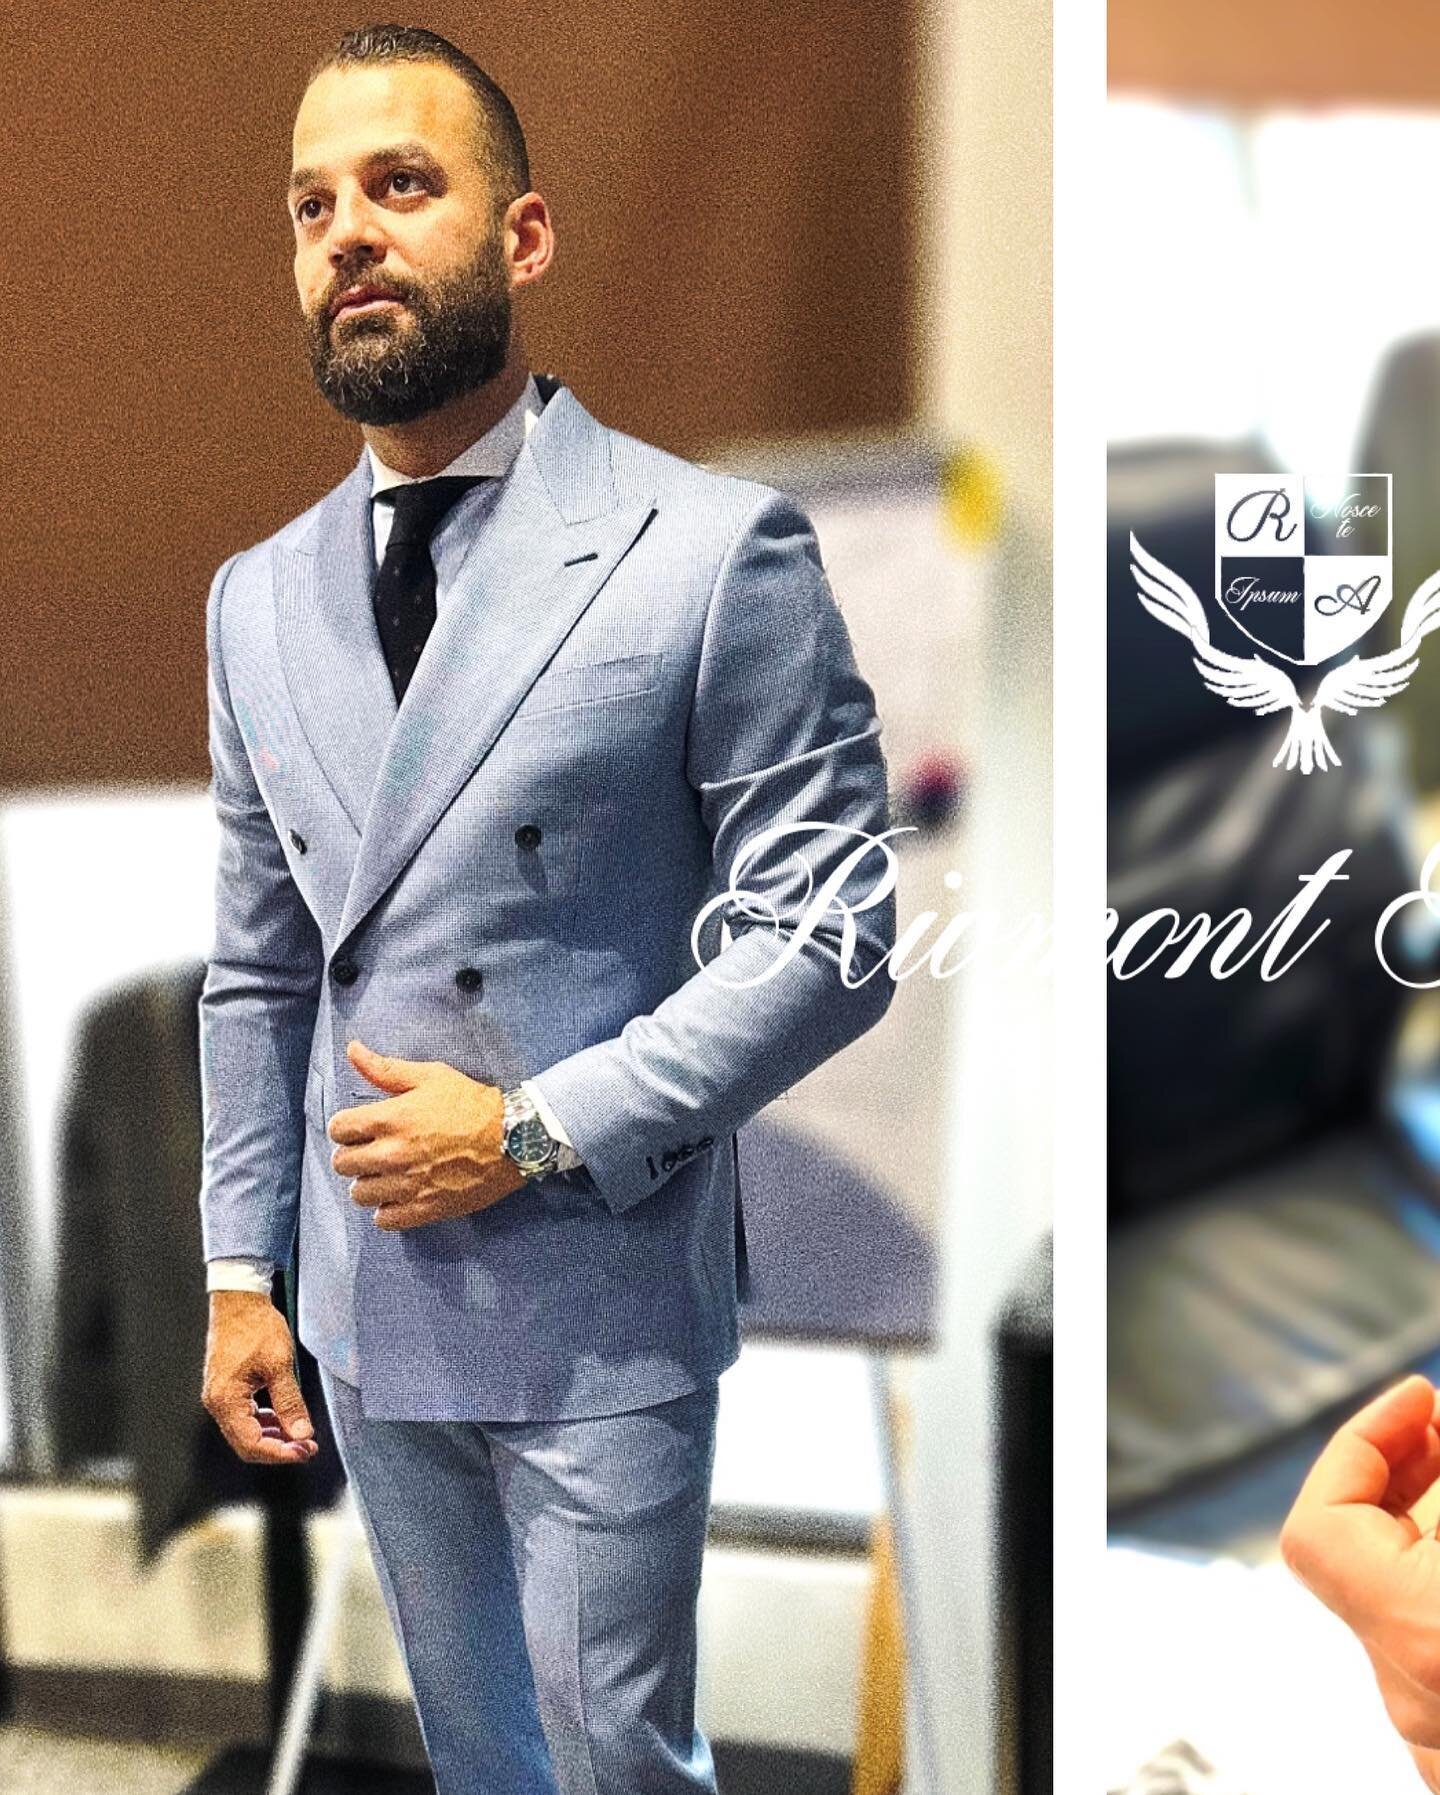 🎩
Mr.Morales shows how classic is always classy 💫
@rivmont_official 
.
#TailoredElegance #Rivmont24 #CustomClothings #EmeraldGreen #SkyBlue #LuxuryWool #CottonSuits